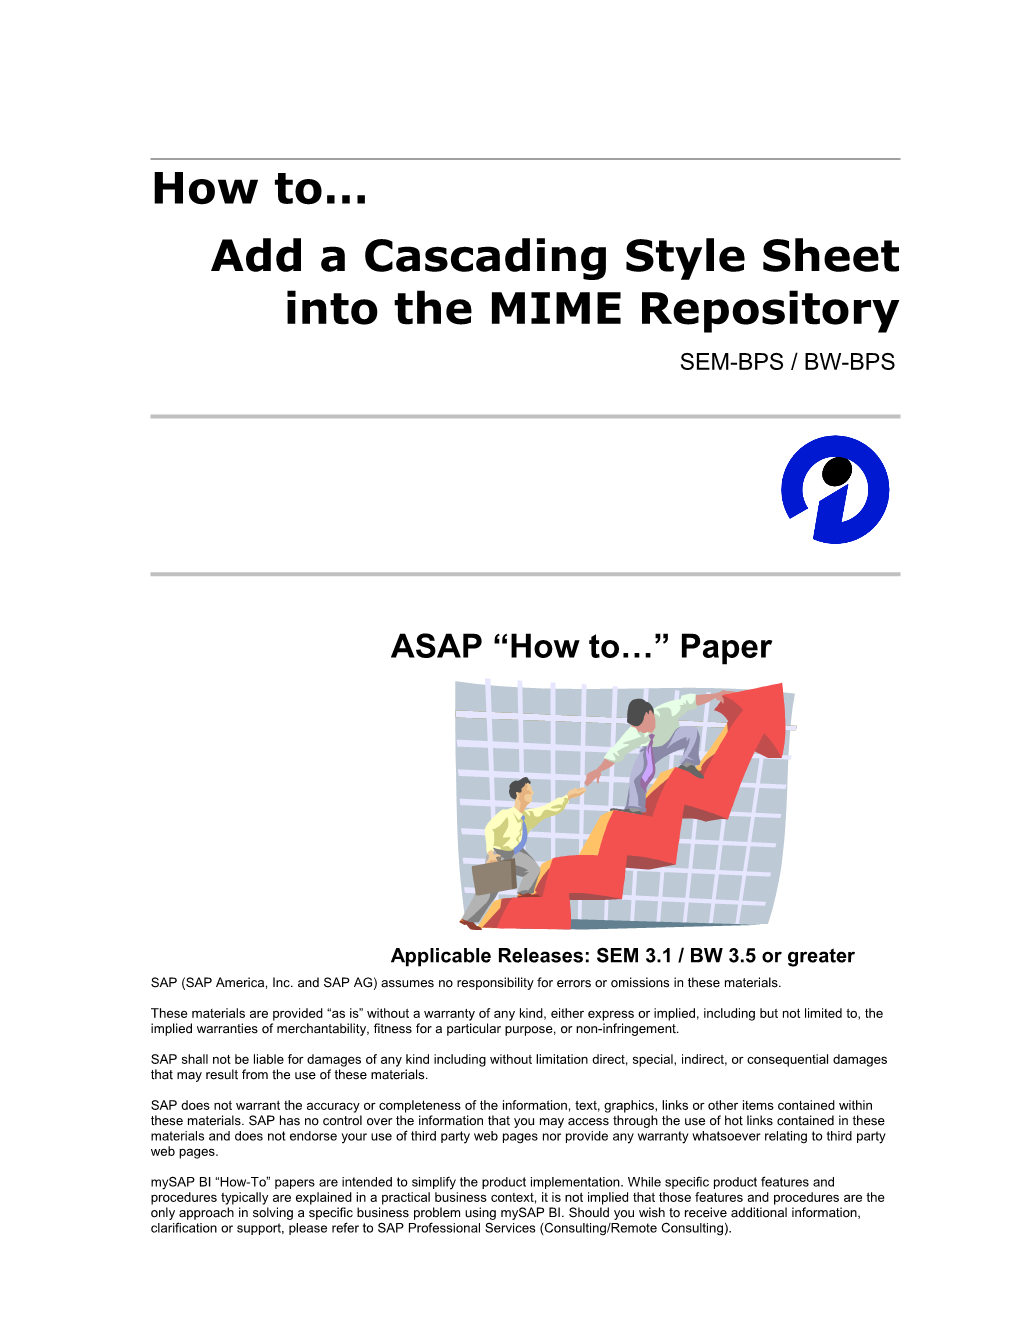 How to Add a Cascading Style Sheet Into the MIME Repository